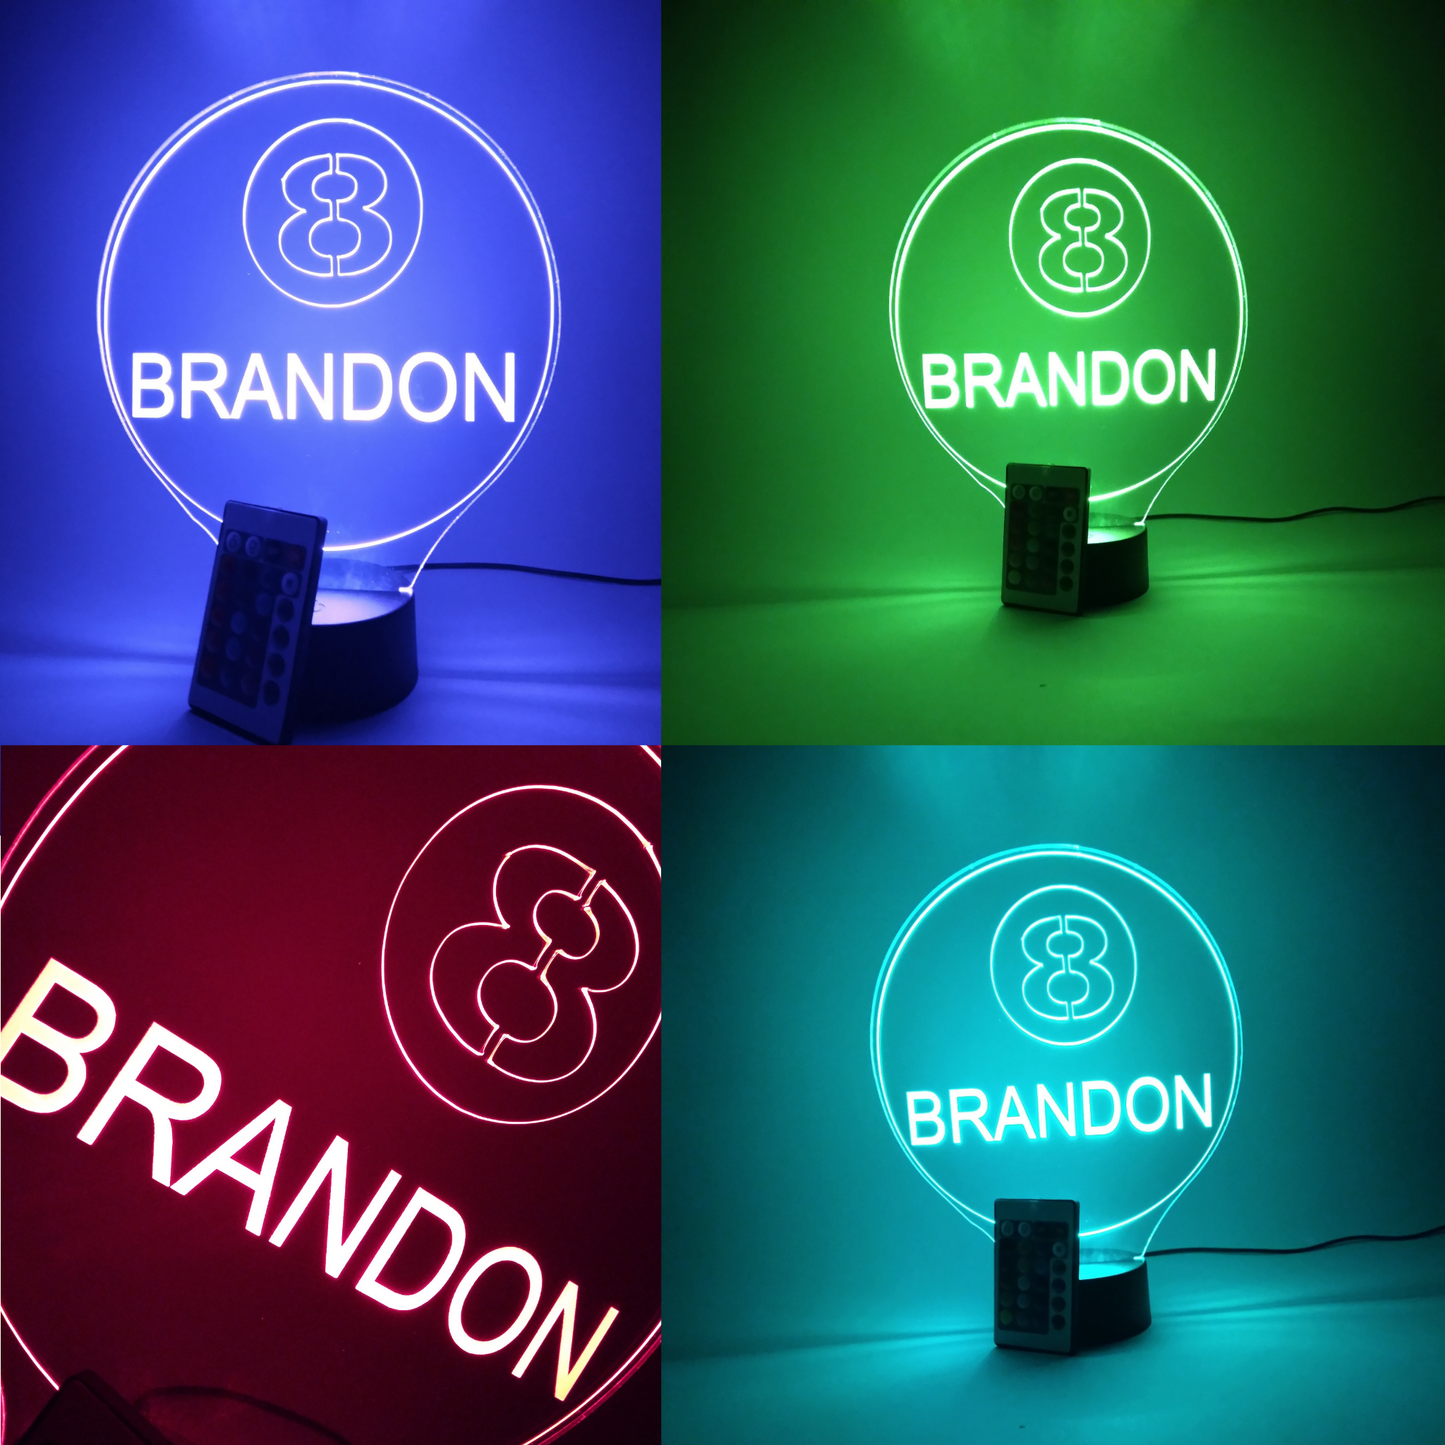 8 Eight Ball Pool Billiards Personalized Night Light Up Table Desk Lamp LED Eight ball Cue Sports Games Name Engraved 16 Colors with Remote